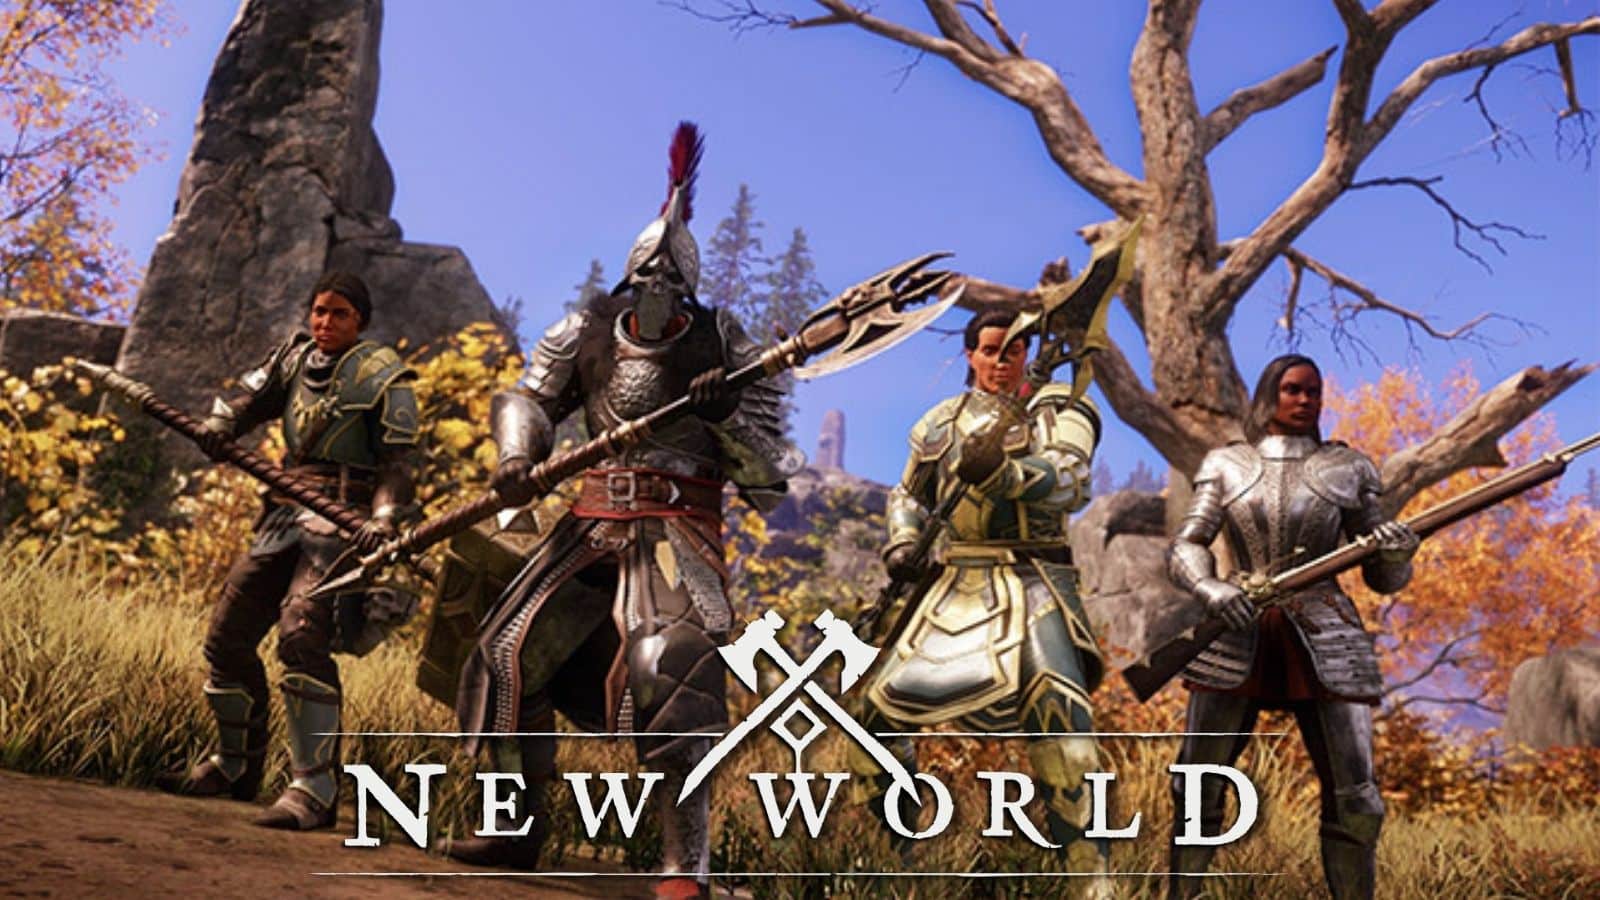 New World on X: In anticipation of the Greatsword coming soon, we